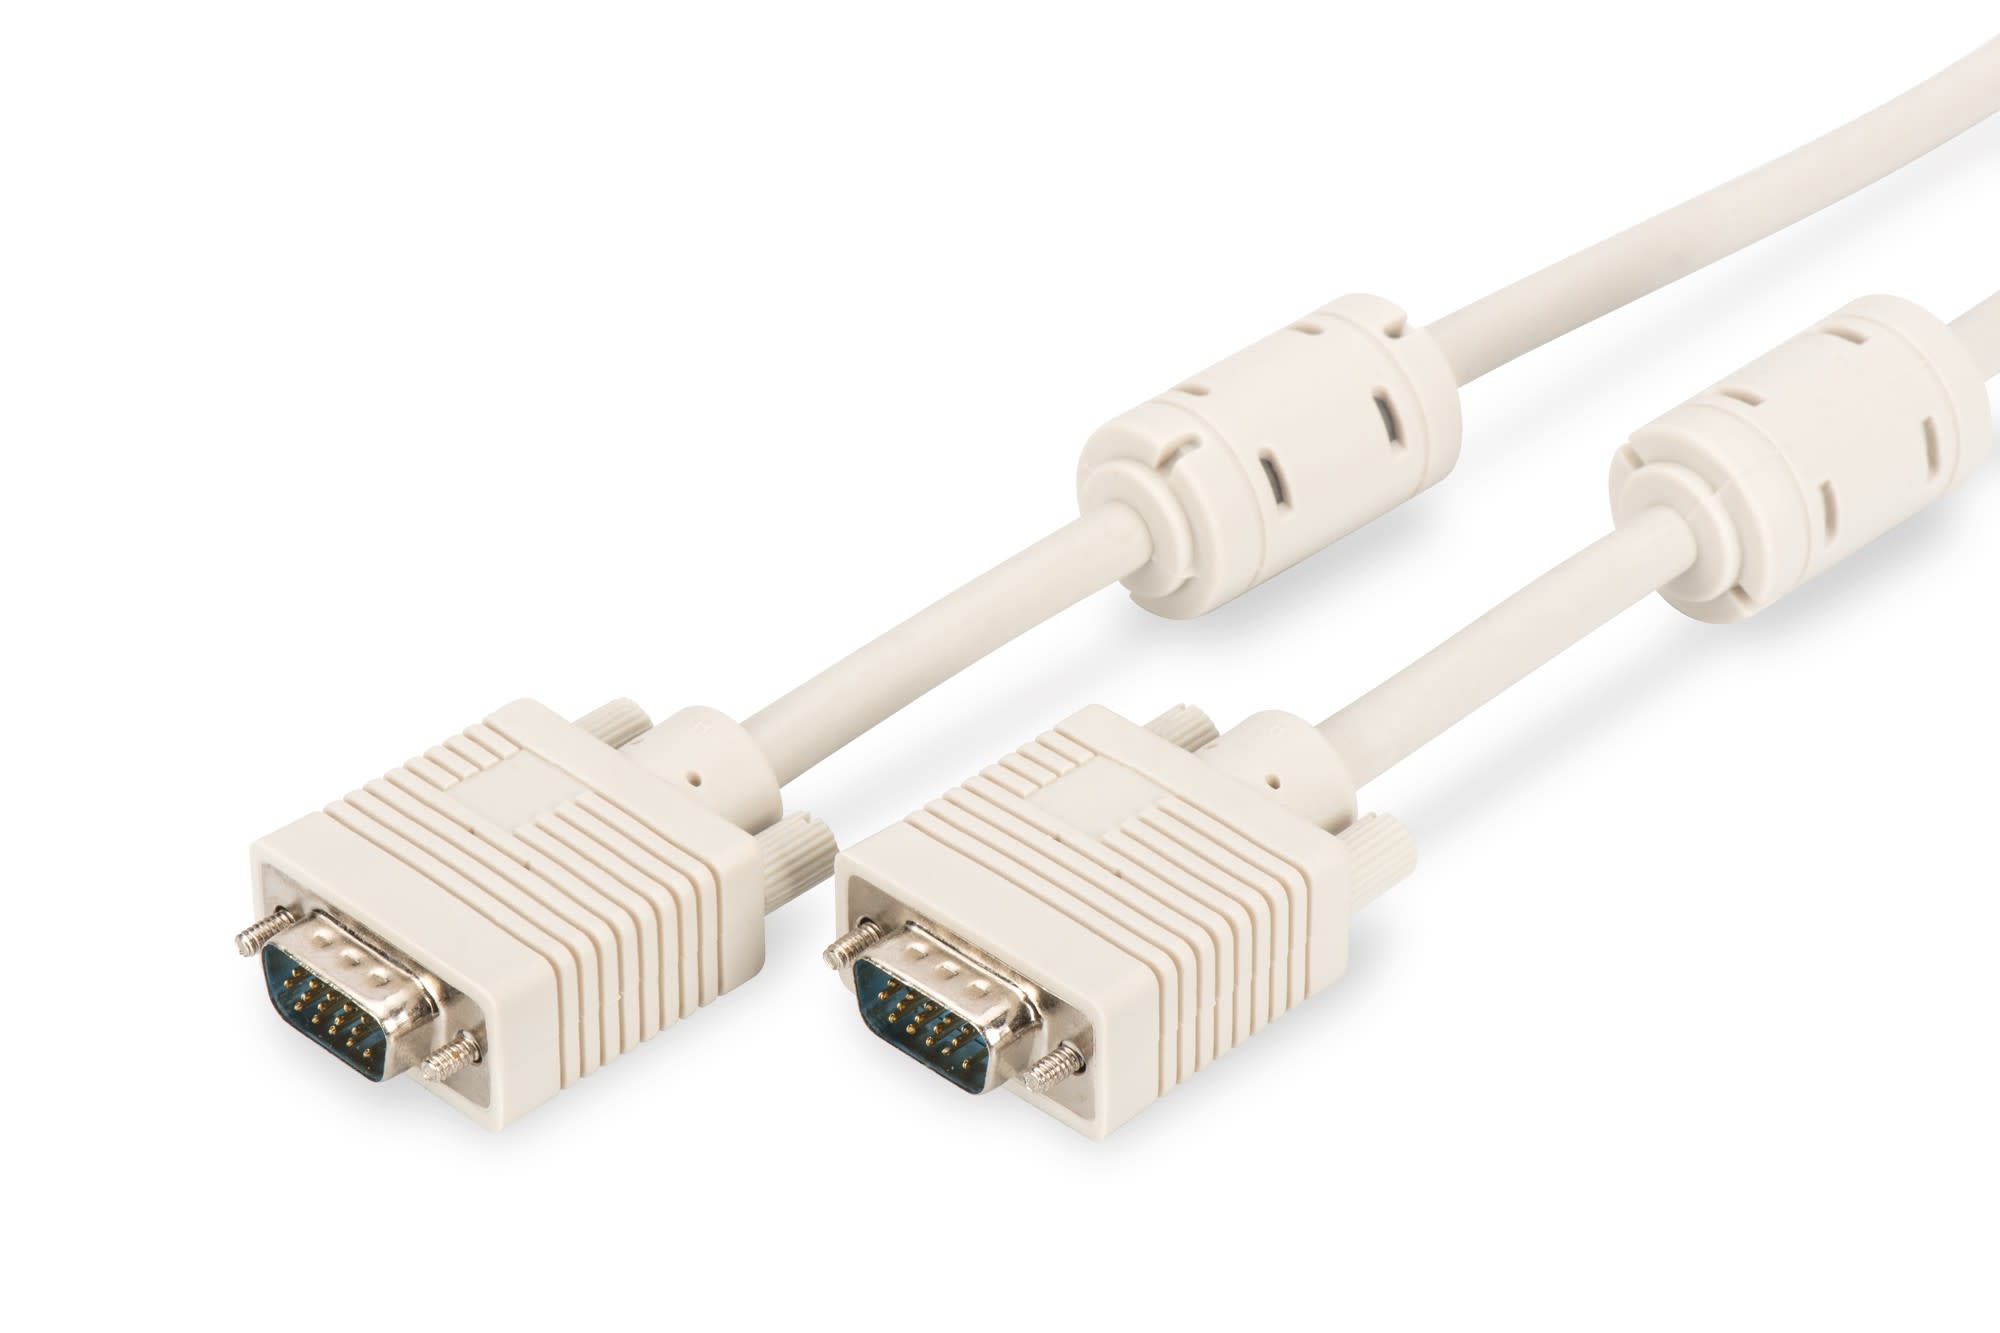 Assmann Electronic - VGA Monitor connection cable, HD15 M-M, 3.0m, 3Coax-7C, 2xferrite, be